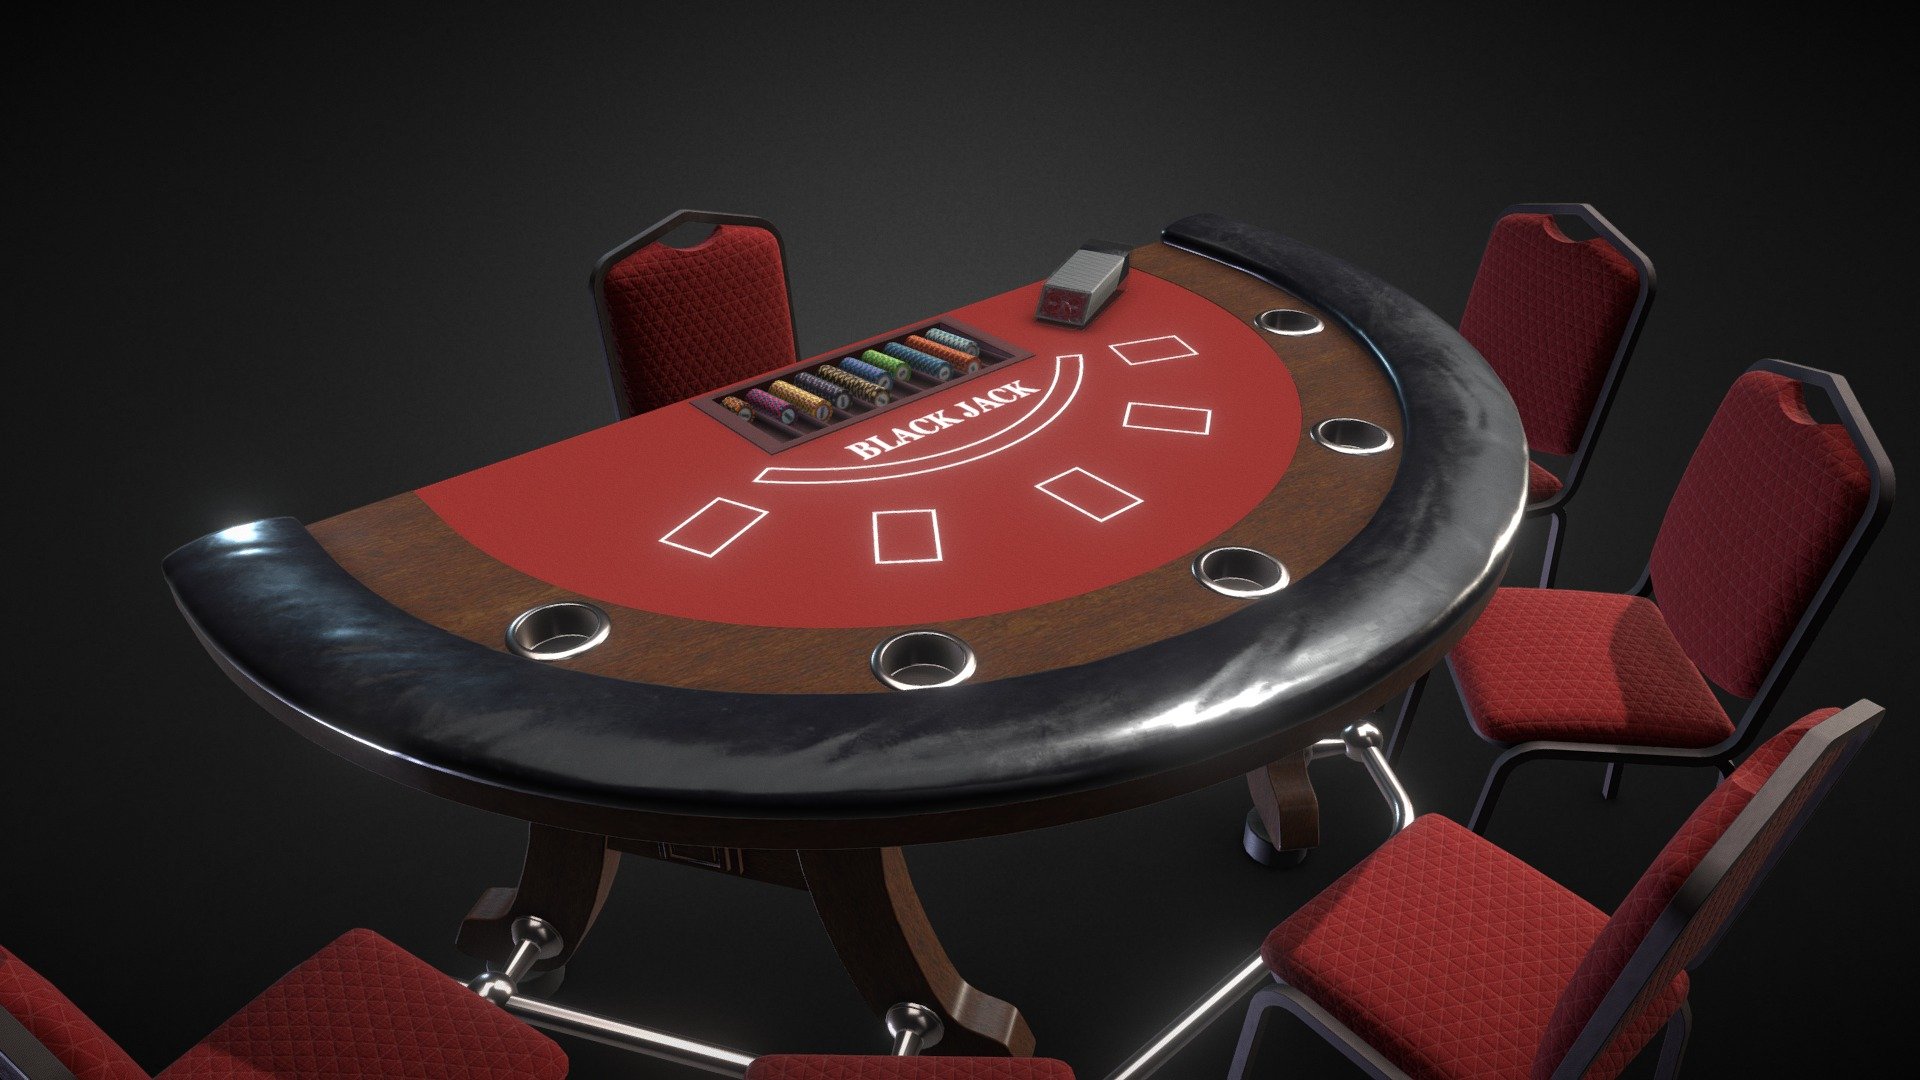 A blackjack table is a complex and elaborate piece of furniture, with six chairs and chips.

-LOW POLY It contains a .rar with the asset in .fbx format, with 2 material and textures in x2048 .jpg - Color - Metalic - Normal map - Roughness - Specular - ambient occlusion - Opacity.

-Number of vertices 27,752.

-Real-world scaled model.

-Ready for game or stage adornment 3d model